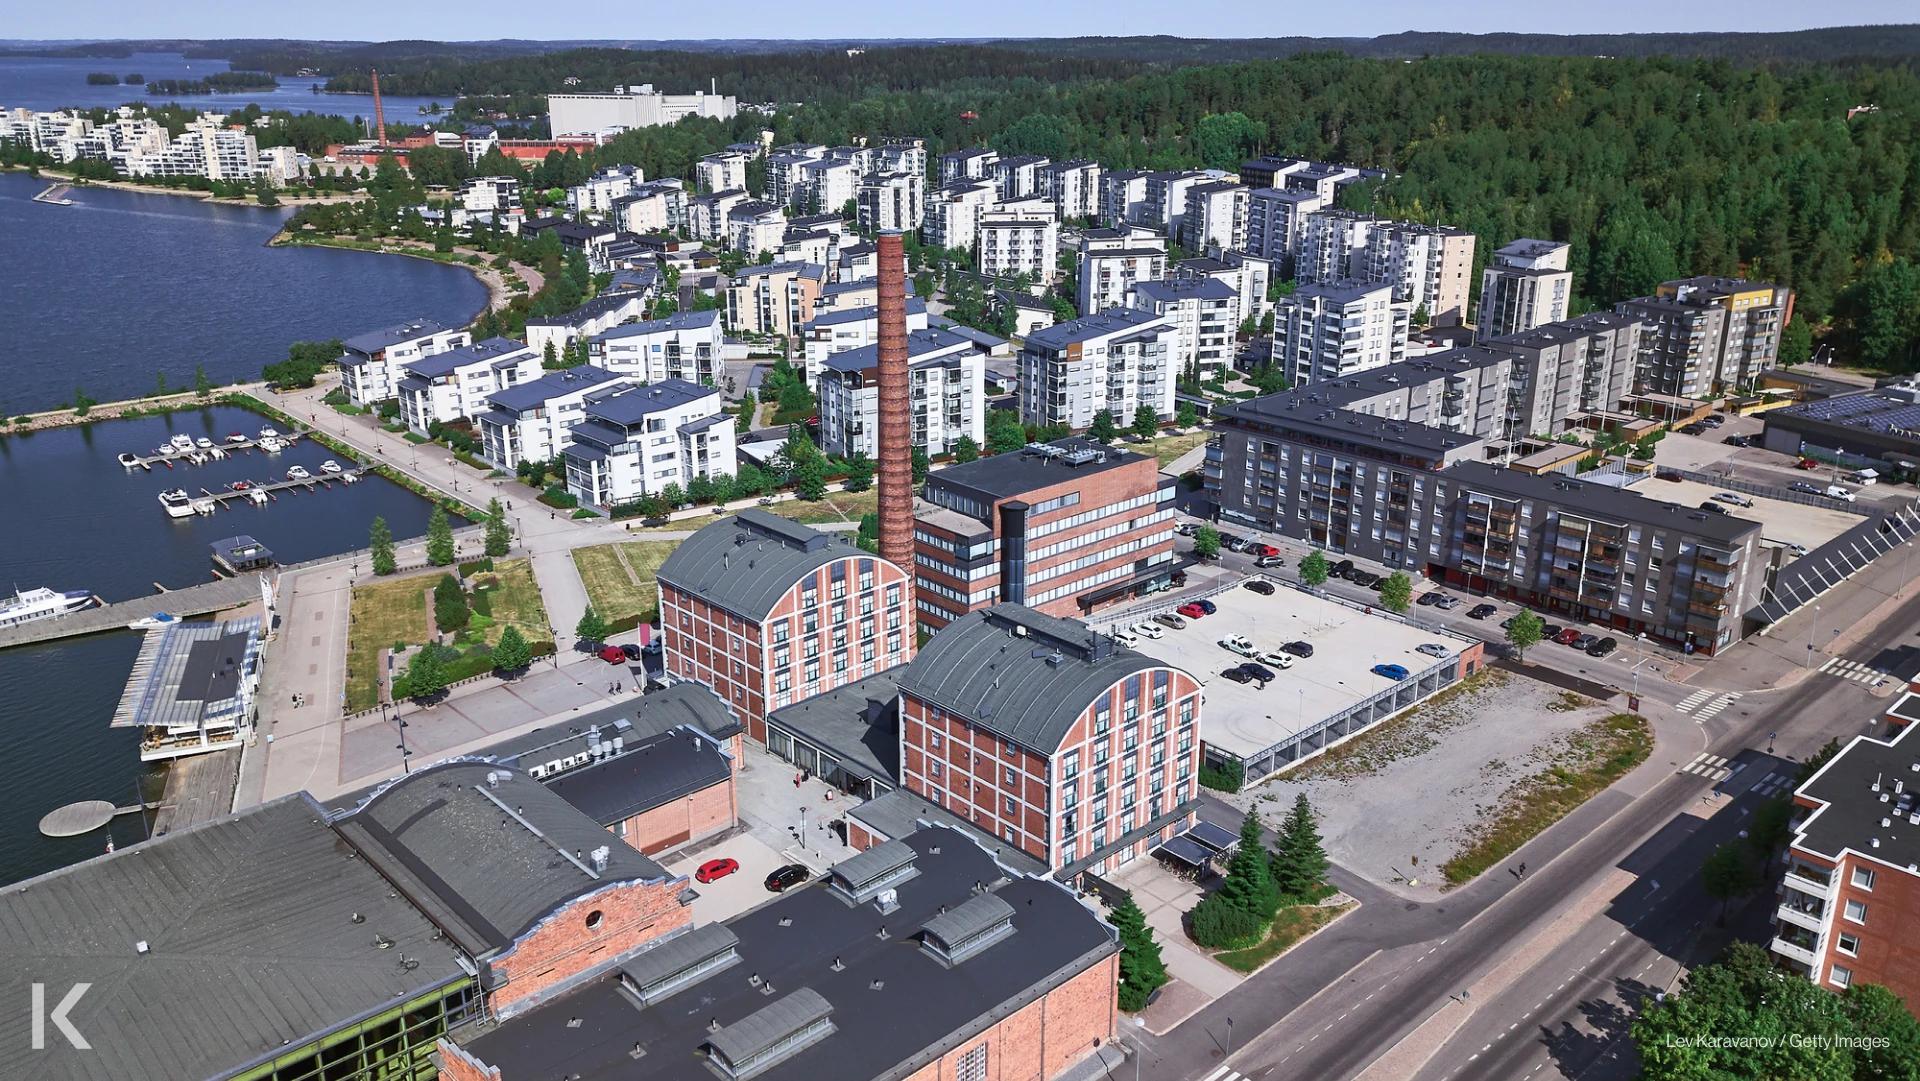 HKA, a Kiona Certified Partner, uses Web Port as their building monitoring software in the Lathi region of Finland.